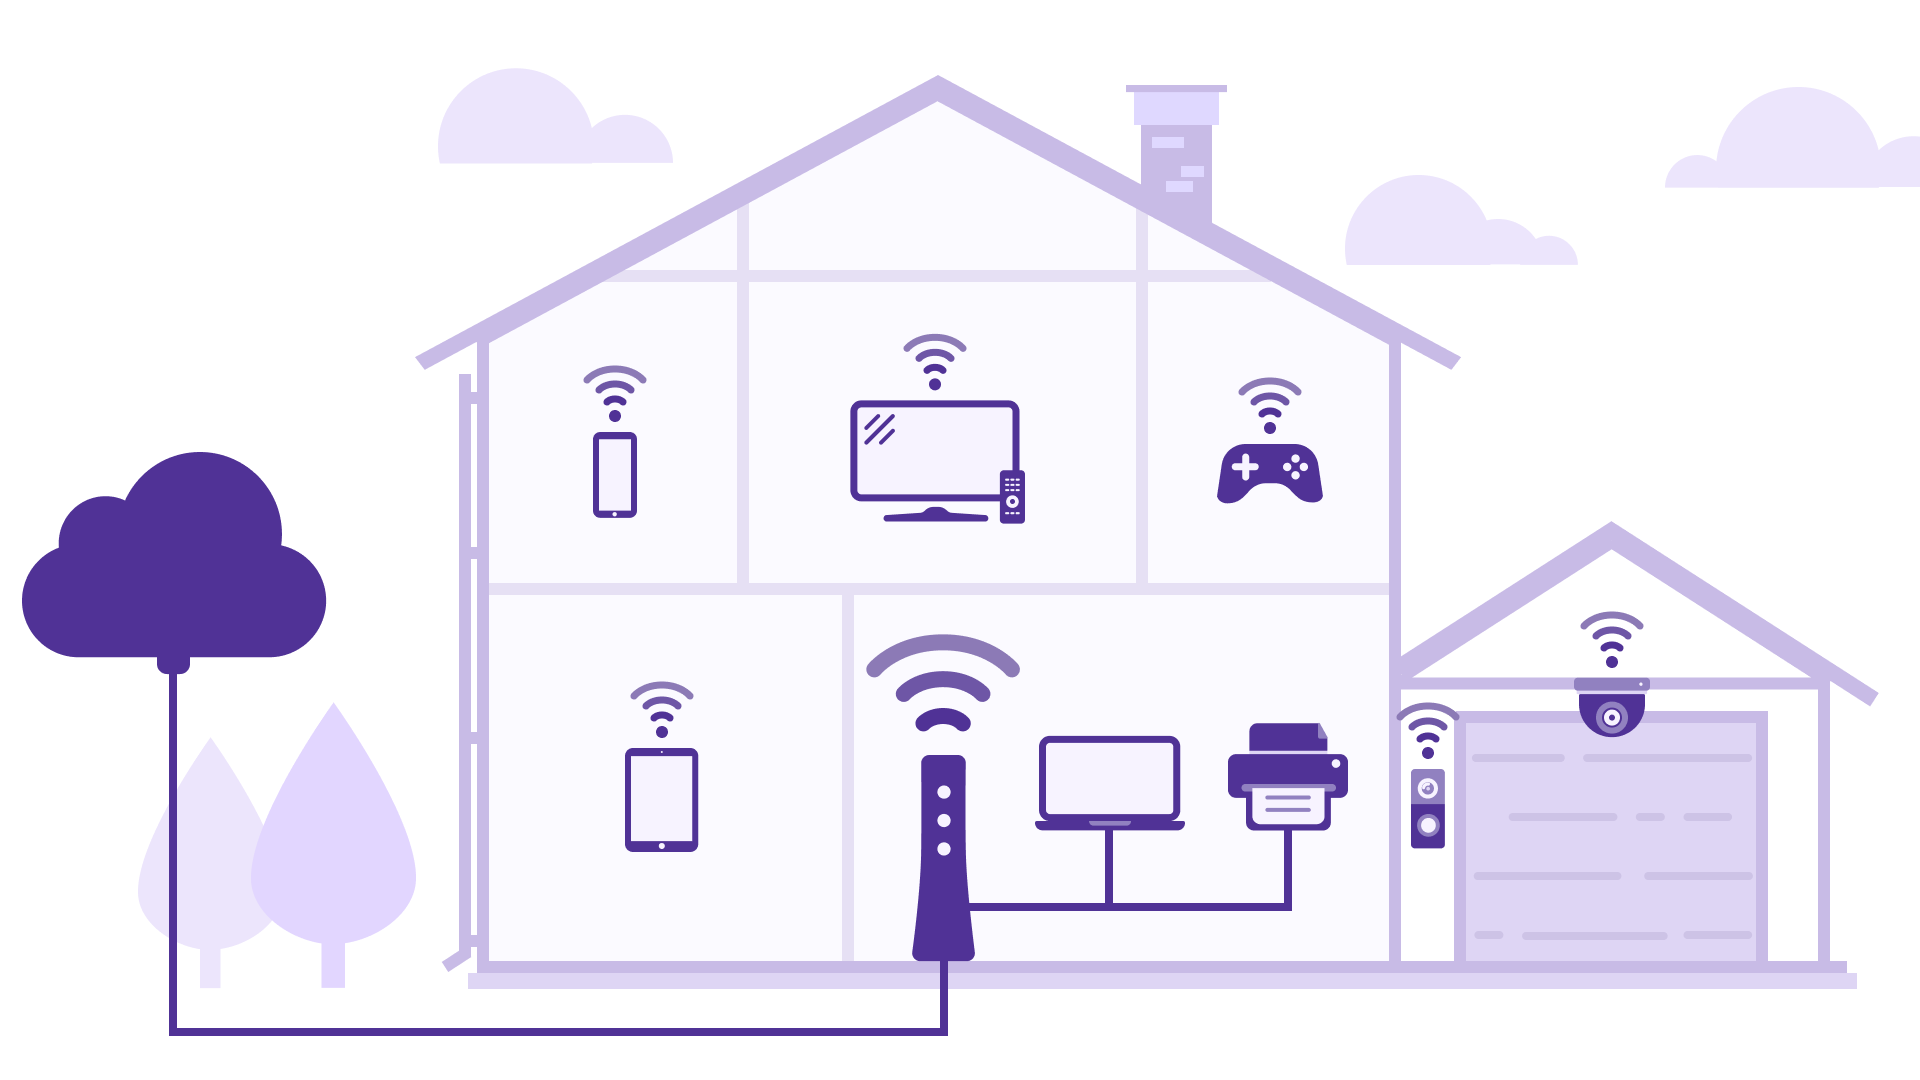 Illustration of home network, including provider network and personal